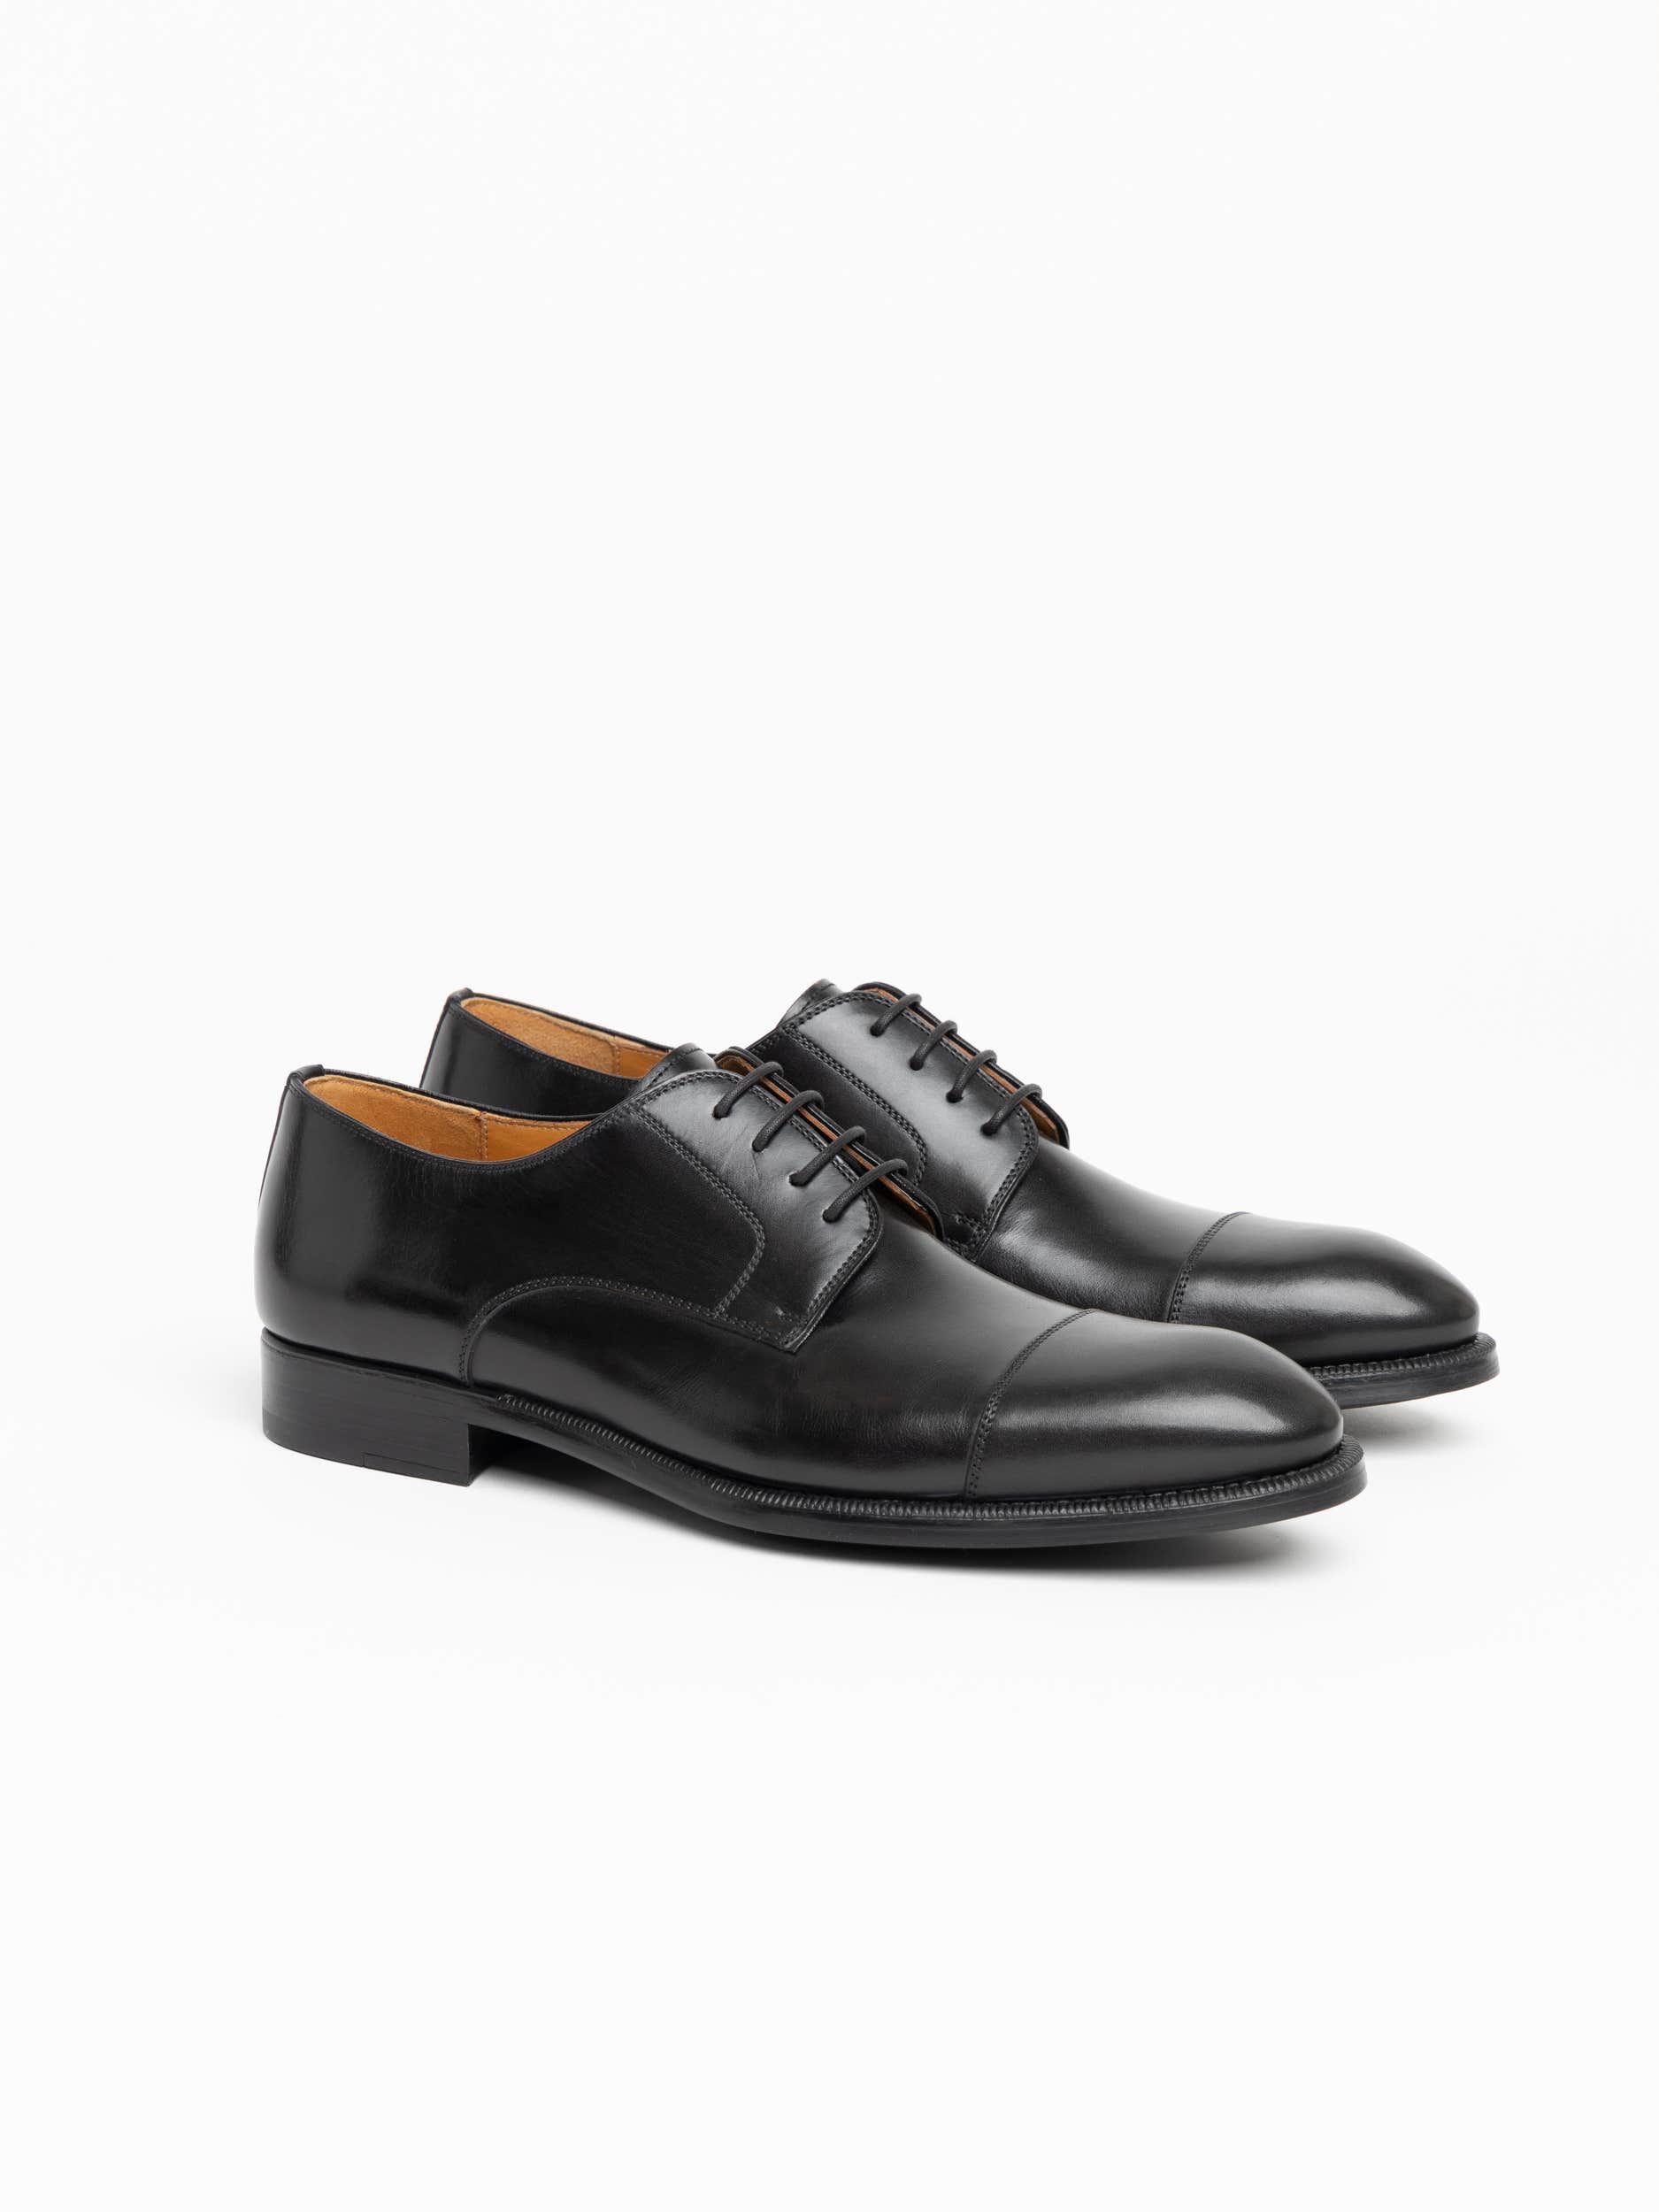 Black Leather Harlan Derby Shoes